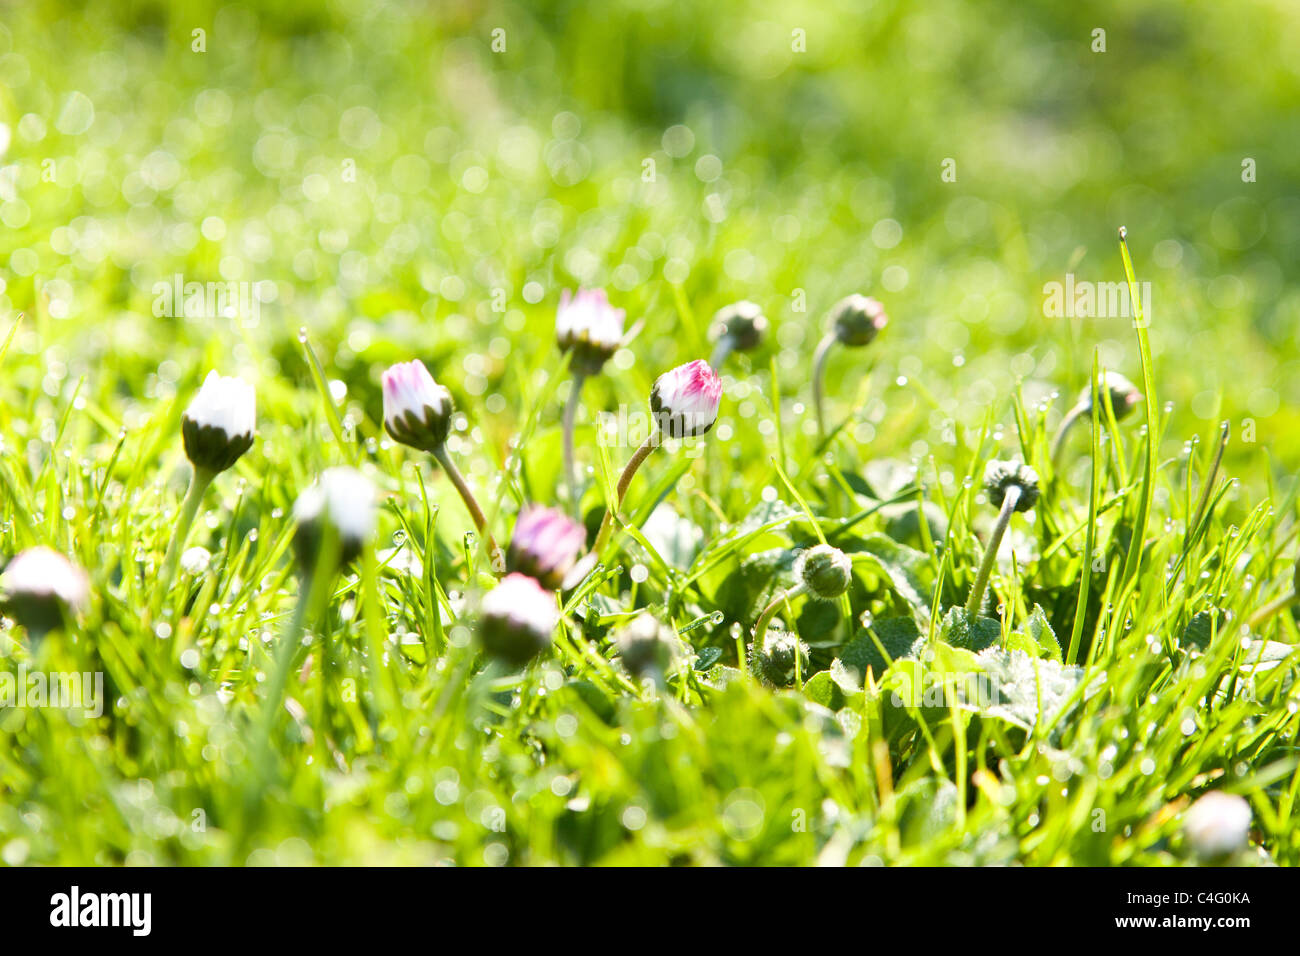 fresh grass with dew drops Stock Photo